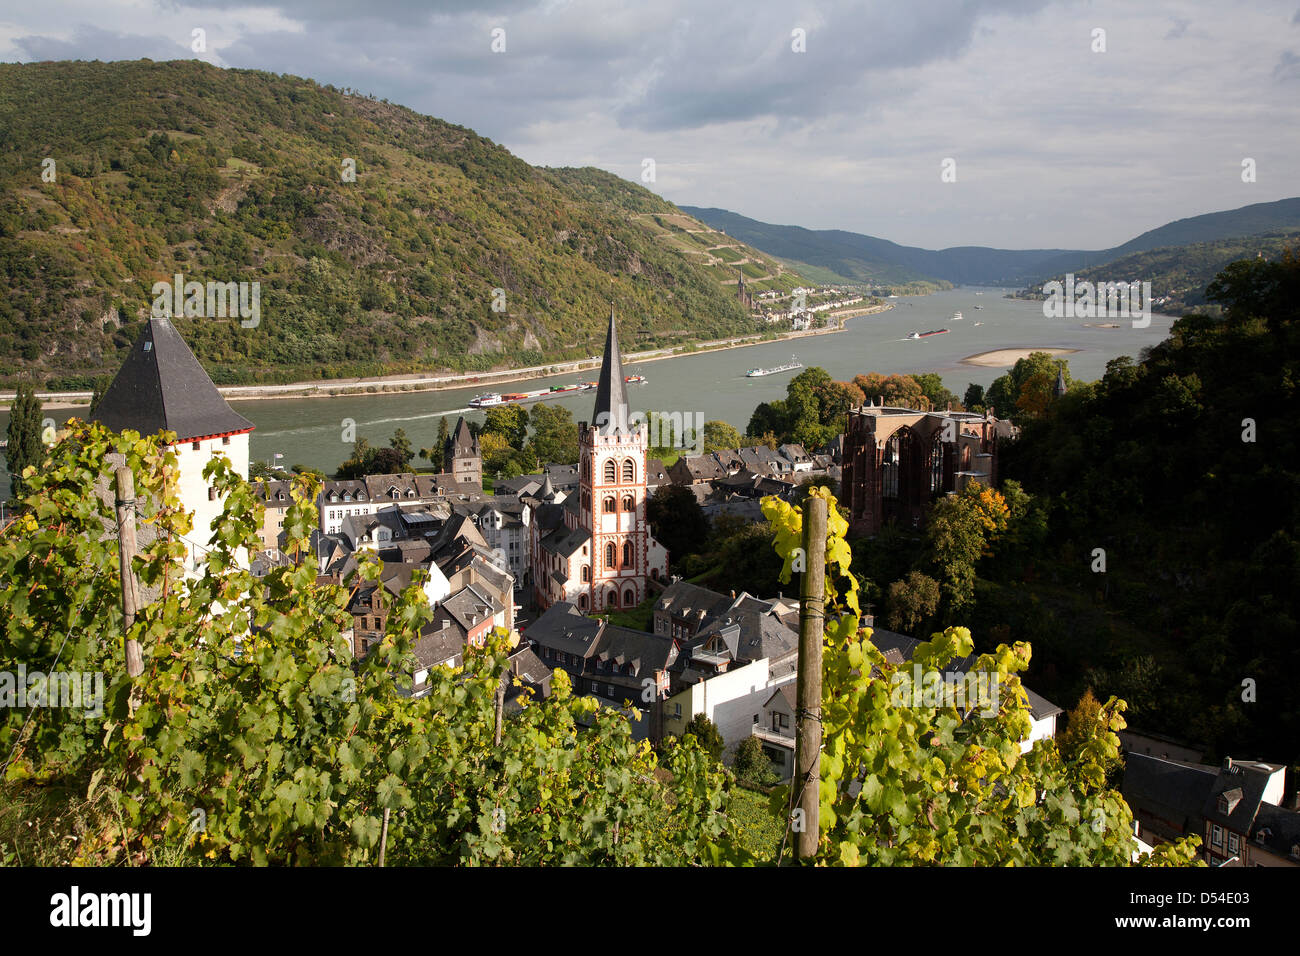 Bacharach, Germany, view over Bacharach Stock Photo